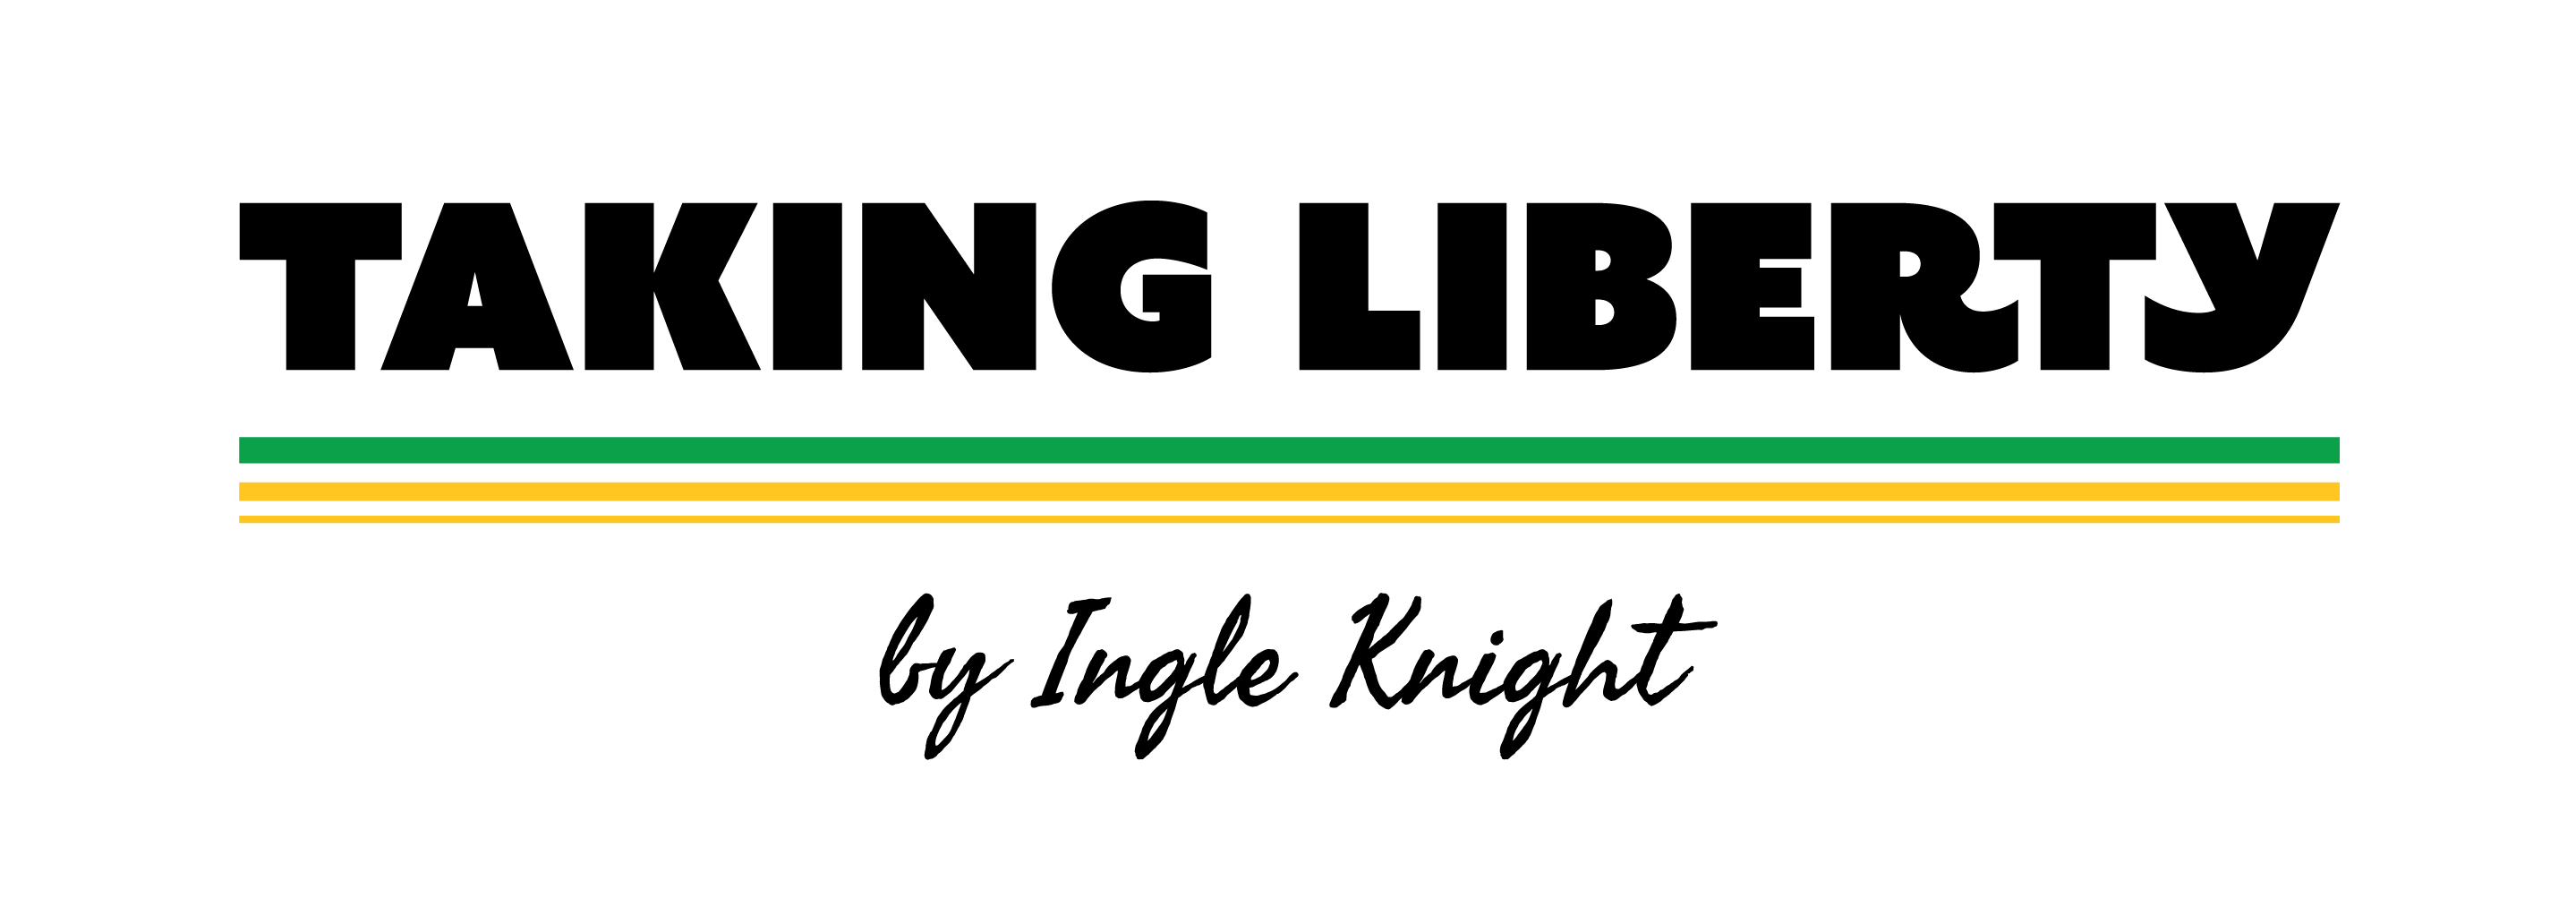 Taking Liberty logo with yellow and green underline stripes